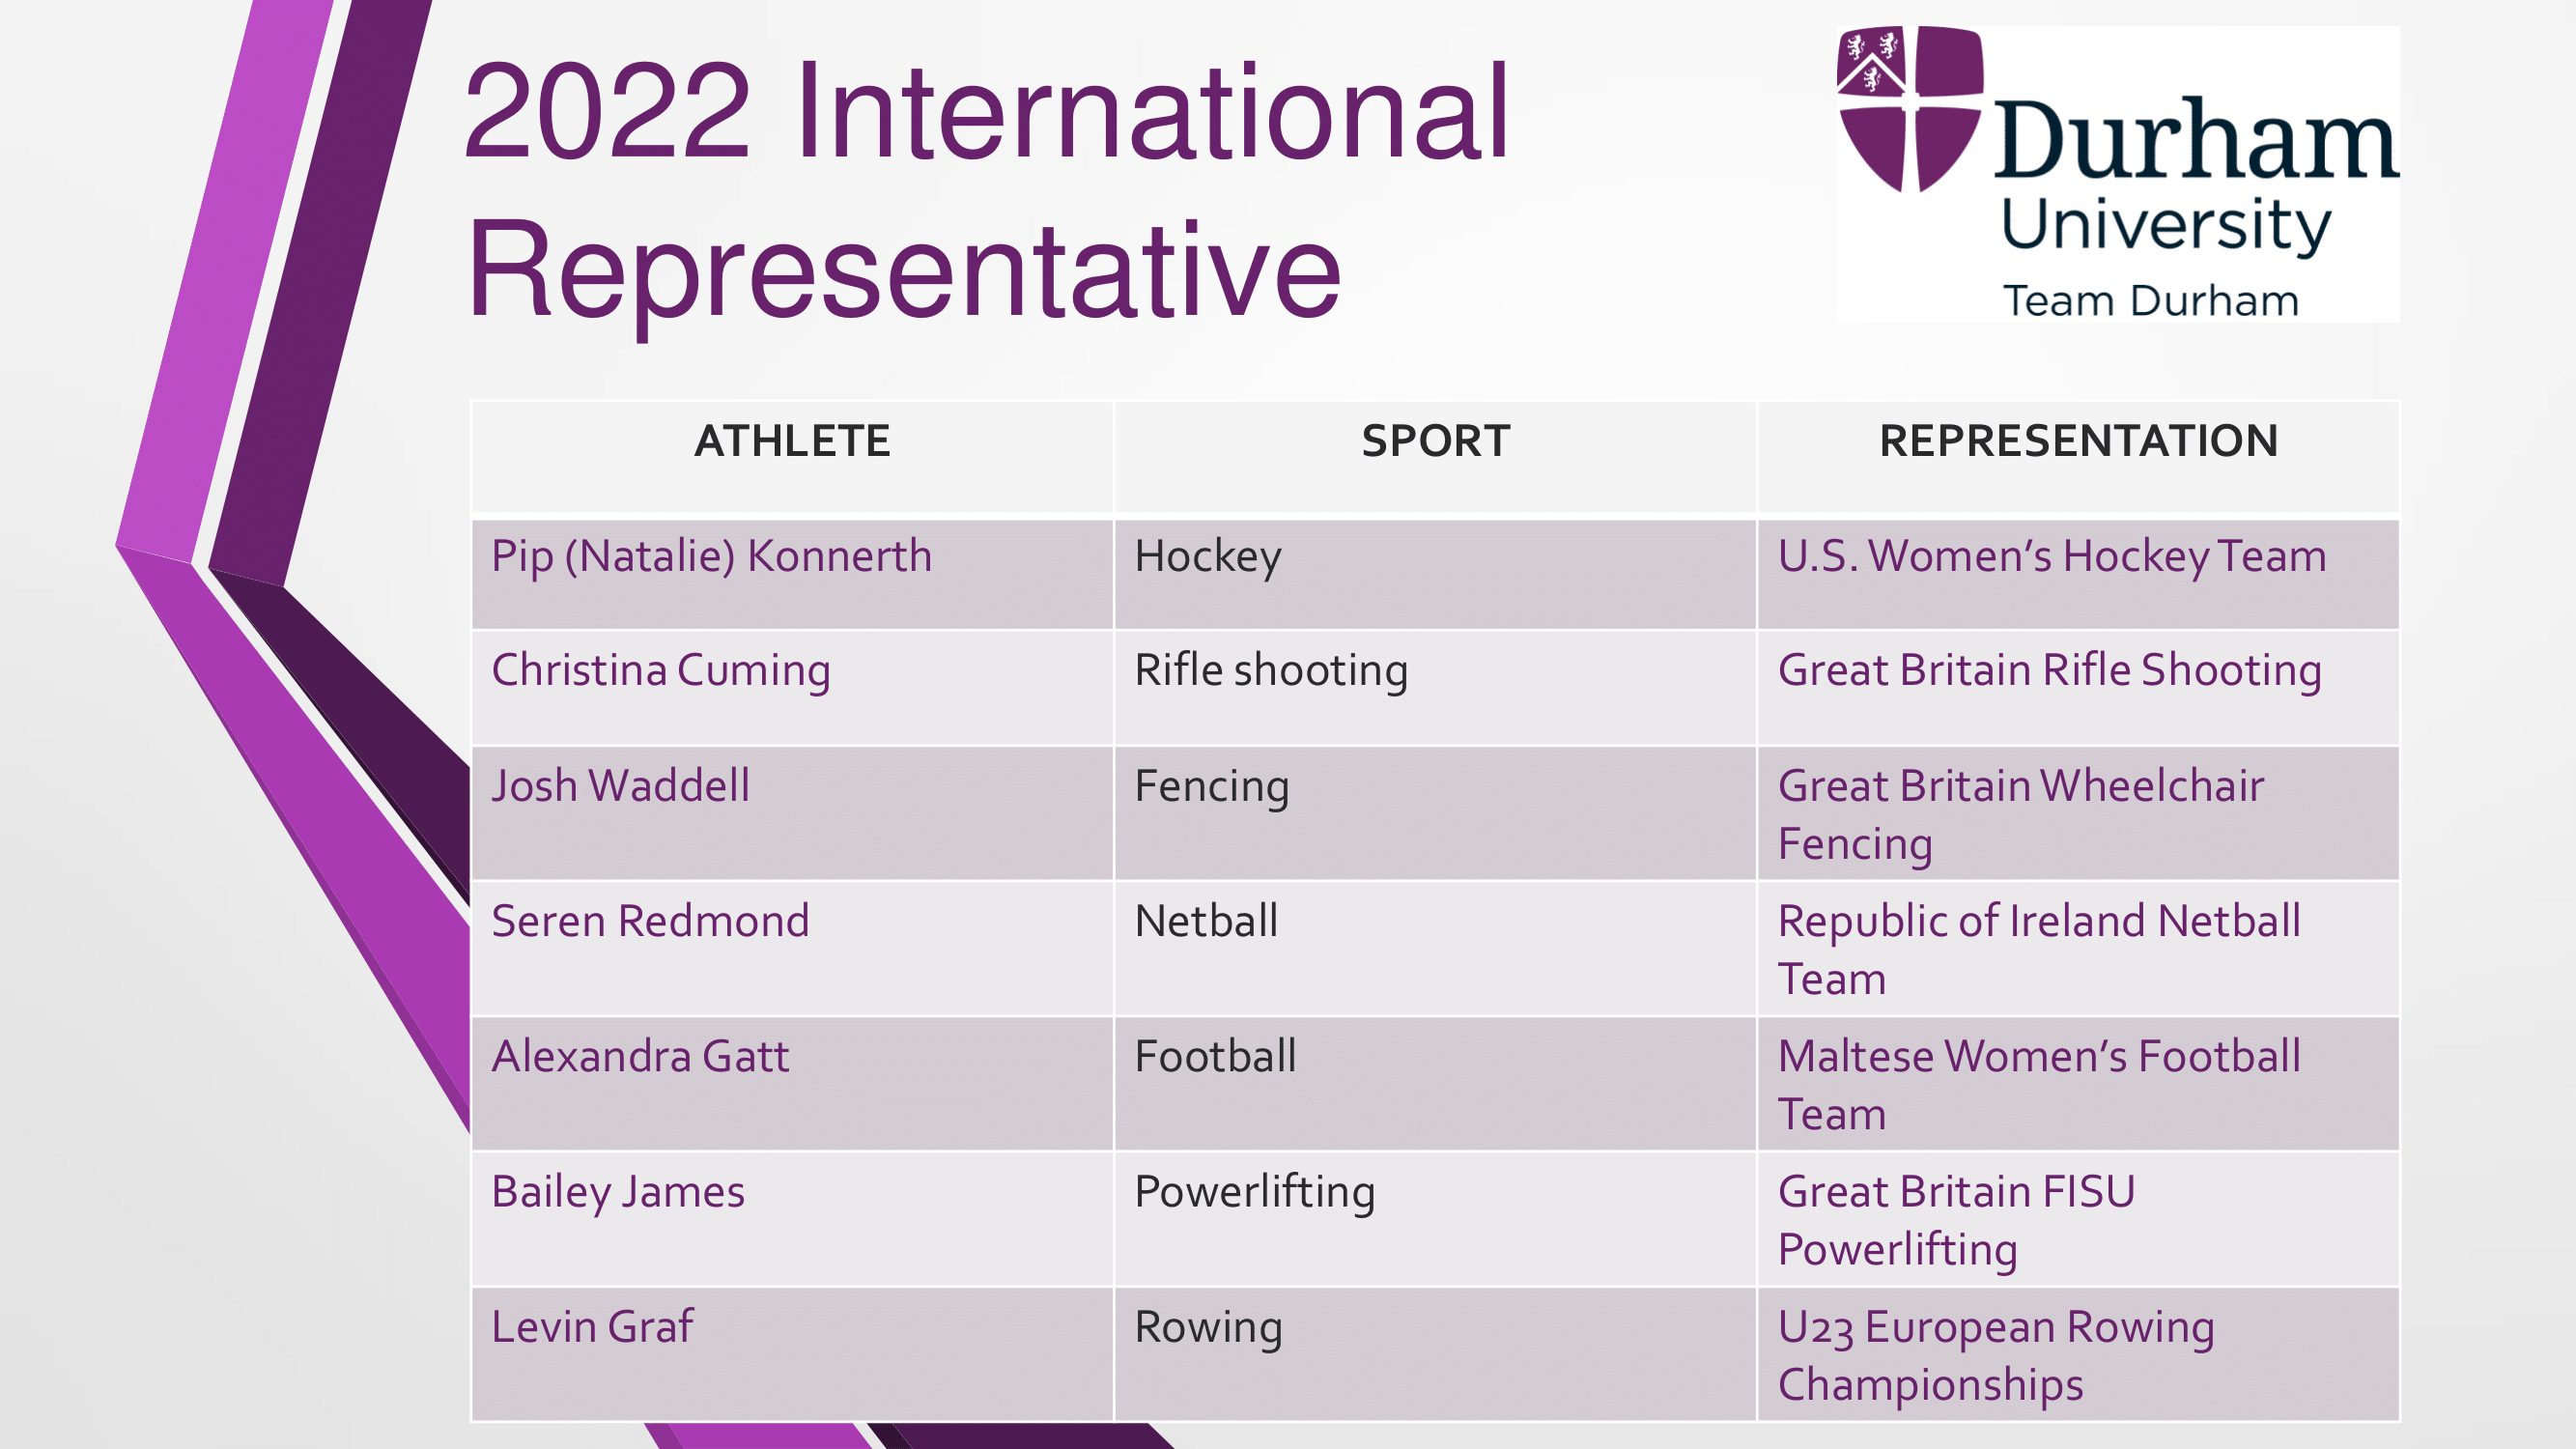 List of national representing athletes